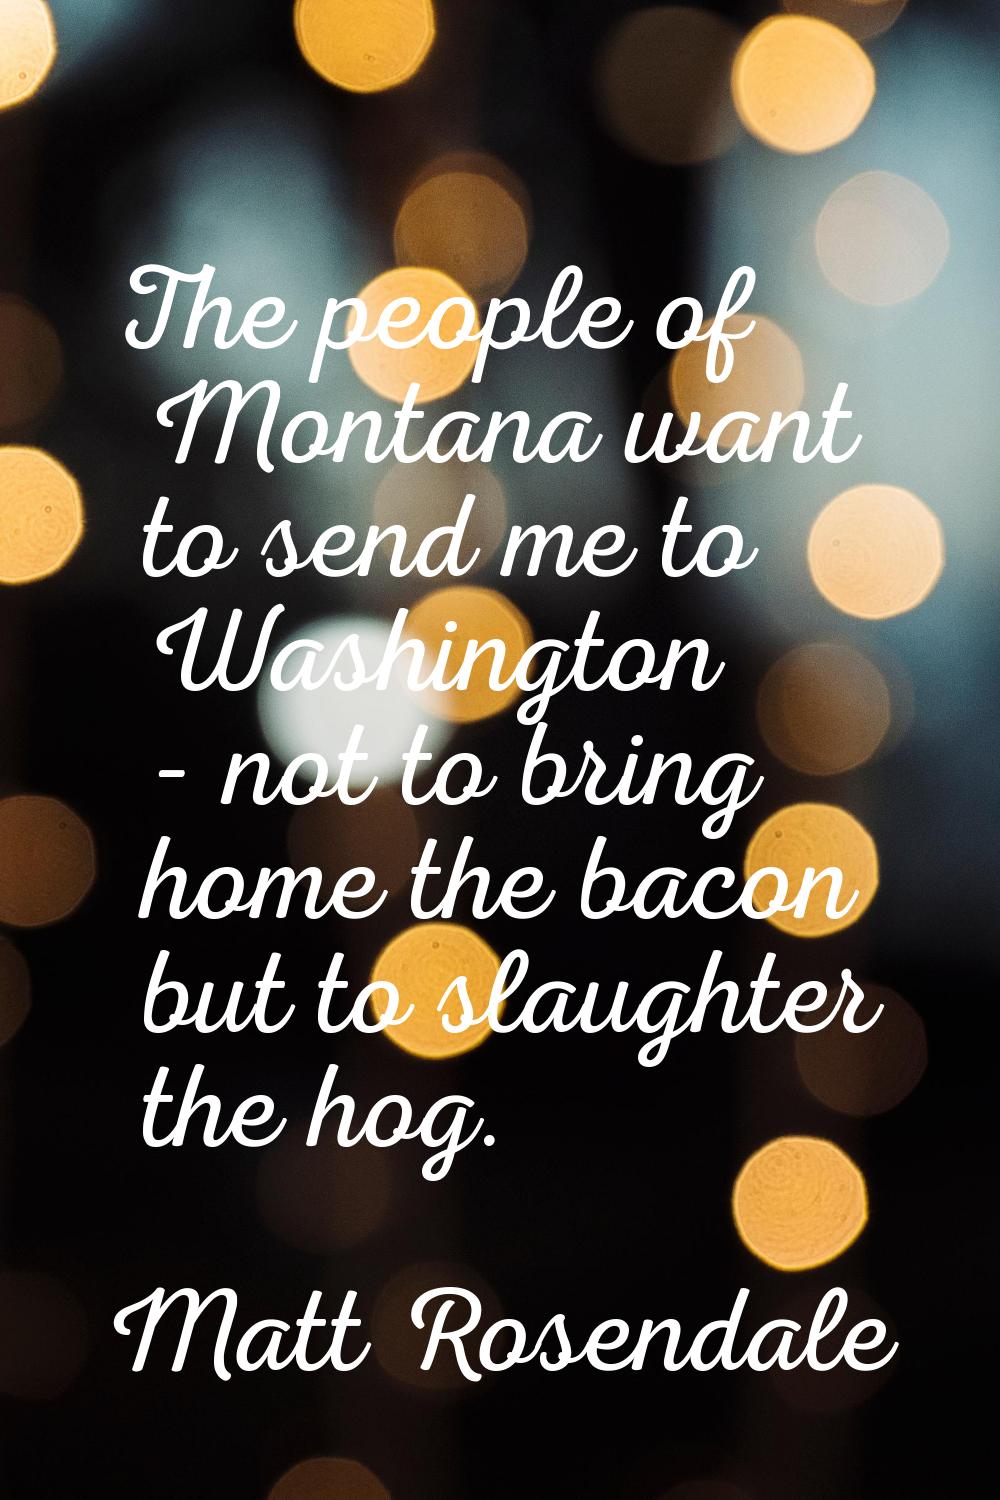 The people of Montana want to send me to Washington - not to bring home the bacon but to slaughter 